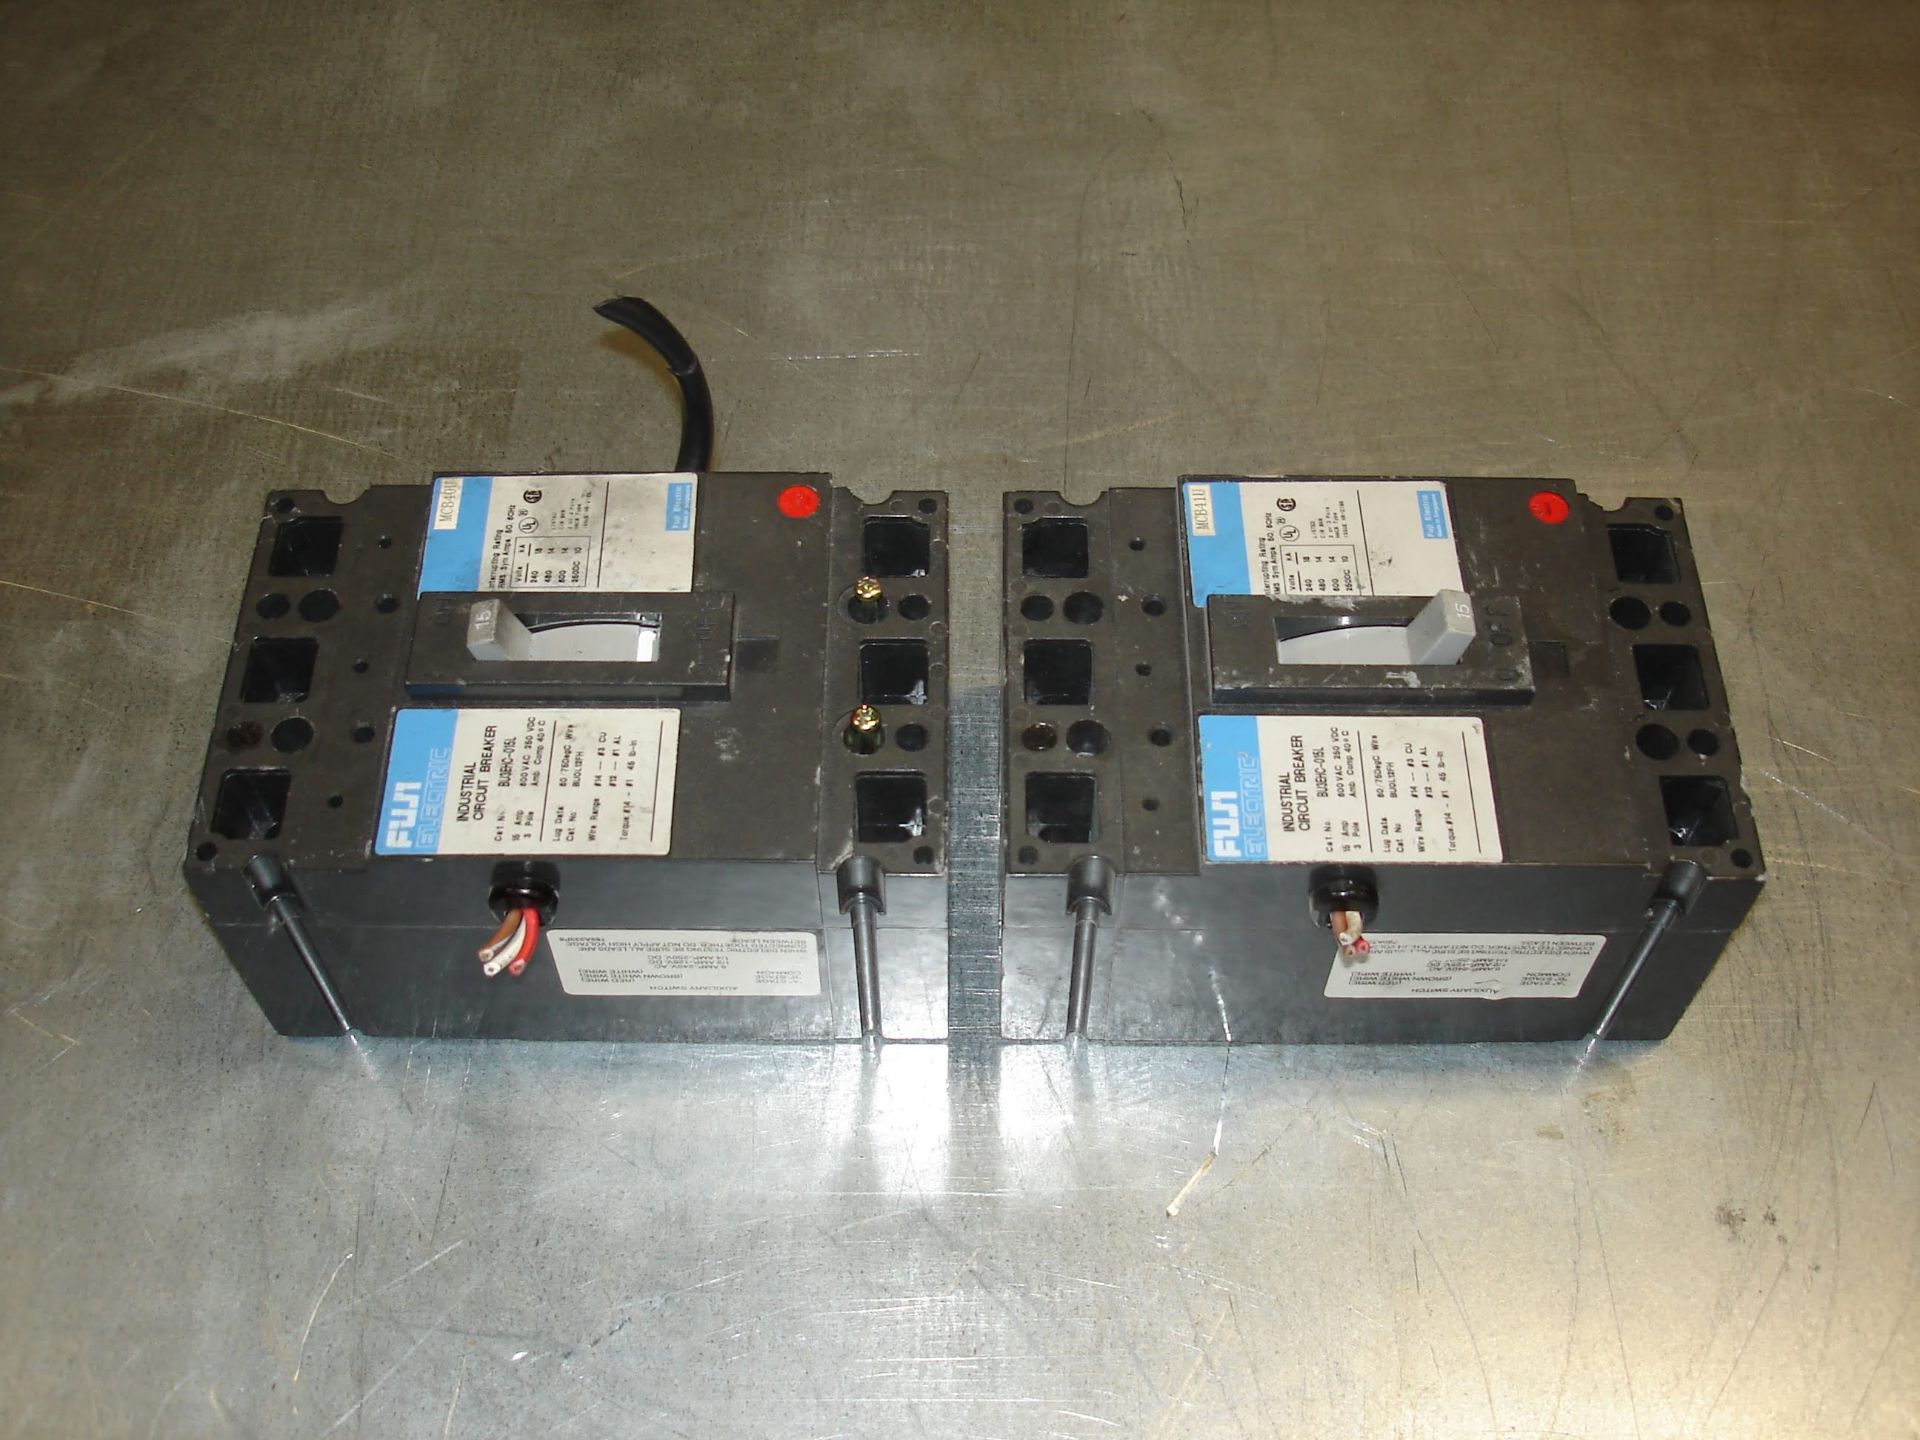 (2) BU3EHC-015L FUJI ELECTRIC INDUSTRIAL CIRCUIT BREAKER USED Pickup your lot(s) for free! - Image 3 of 5